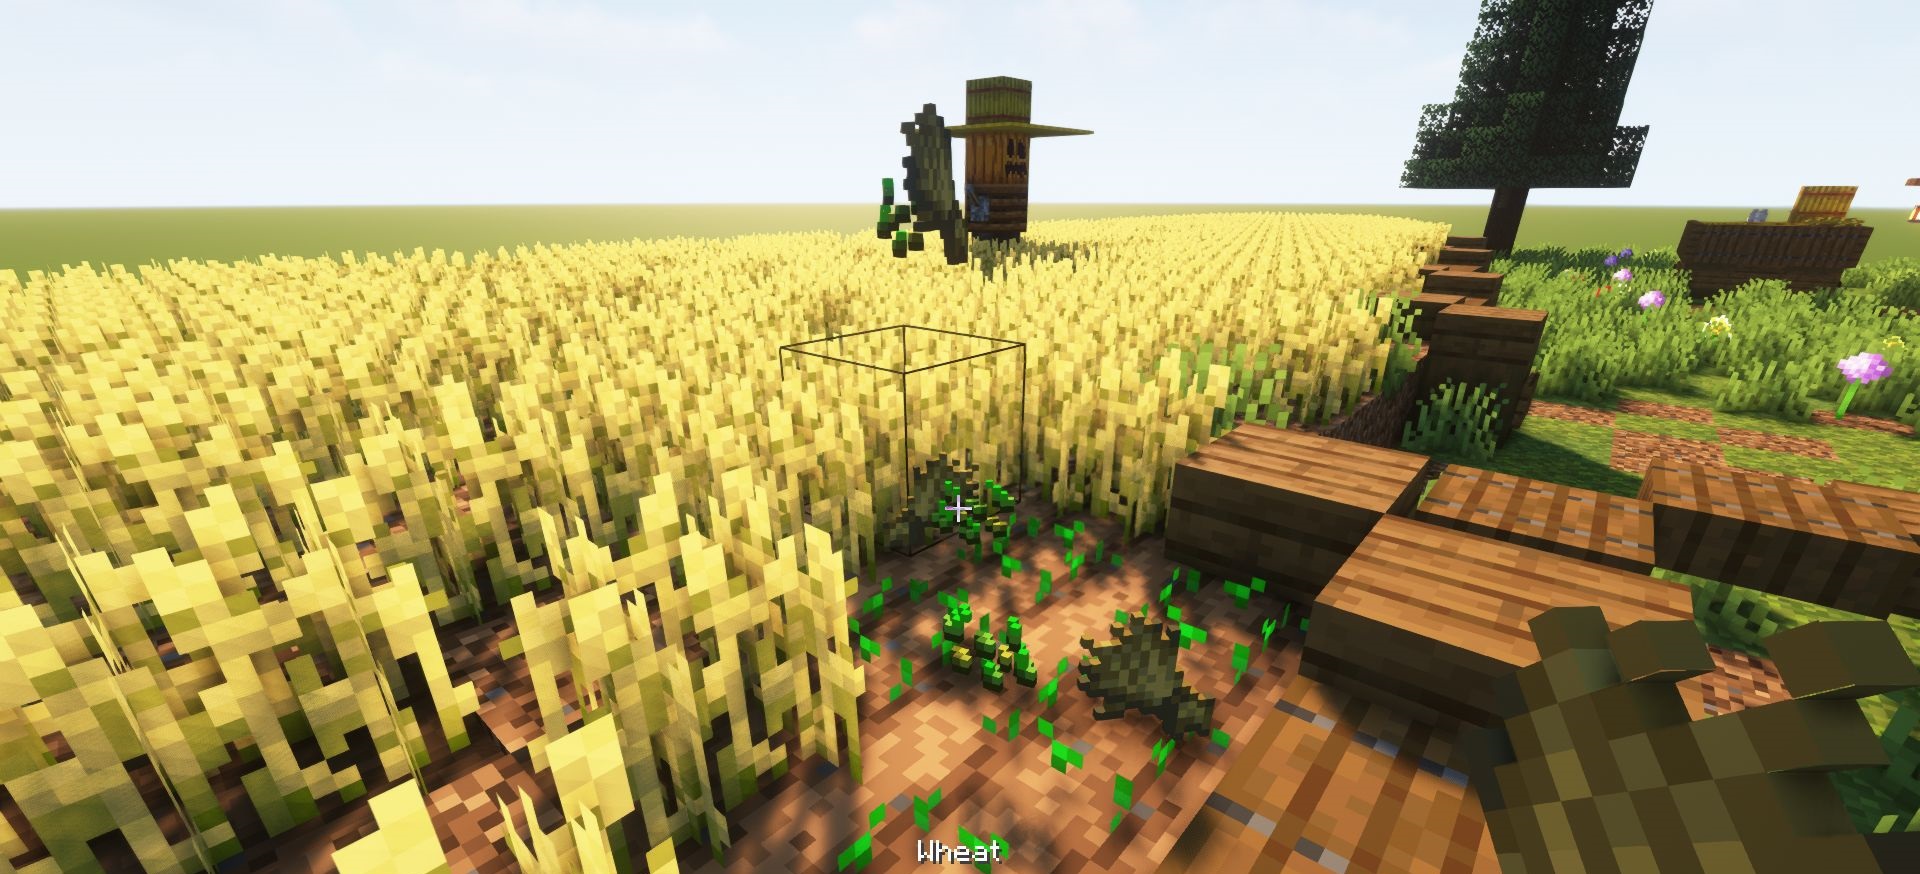 Harvest With Ease screenshot 3